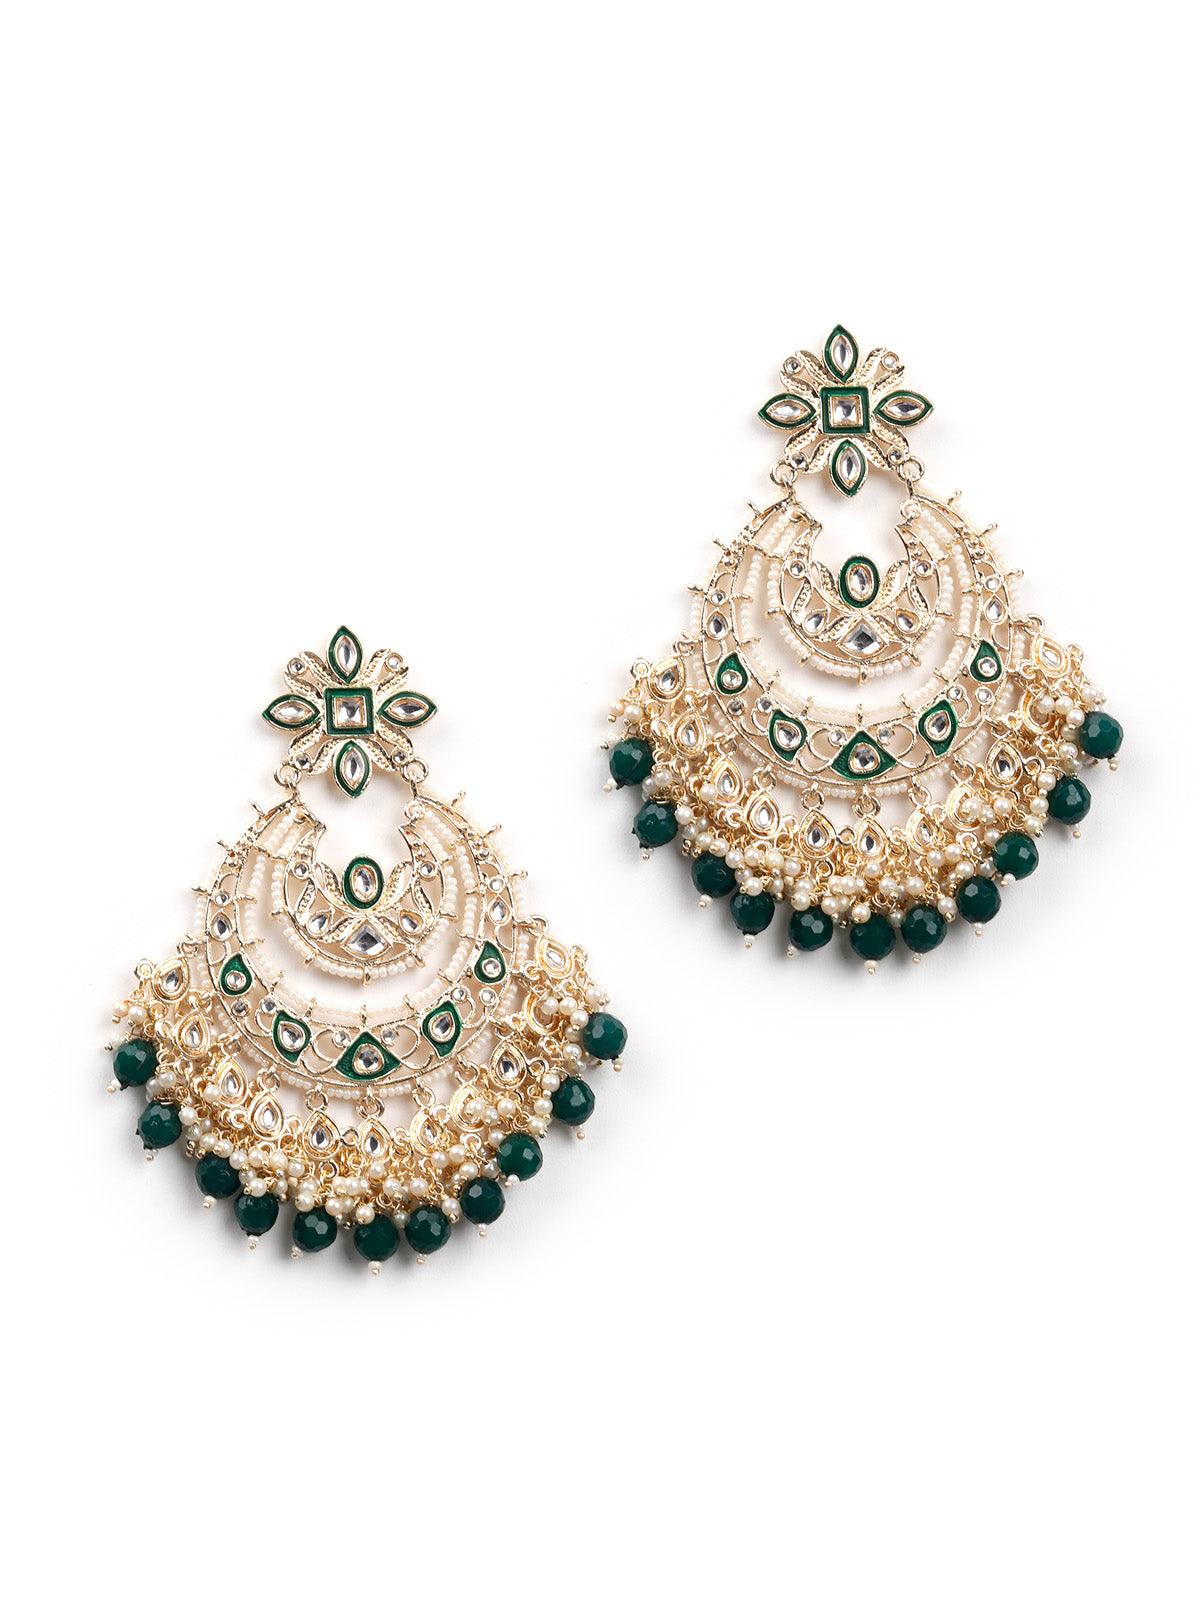 Women's The Gorgeous White And Green Chandbali Earrings - Odette